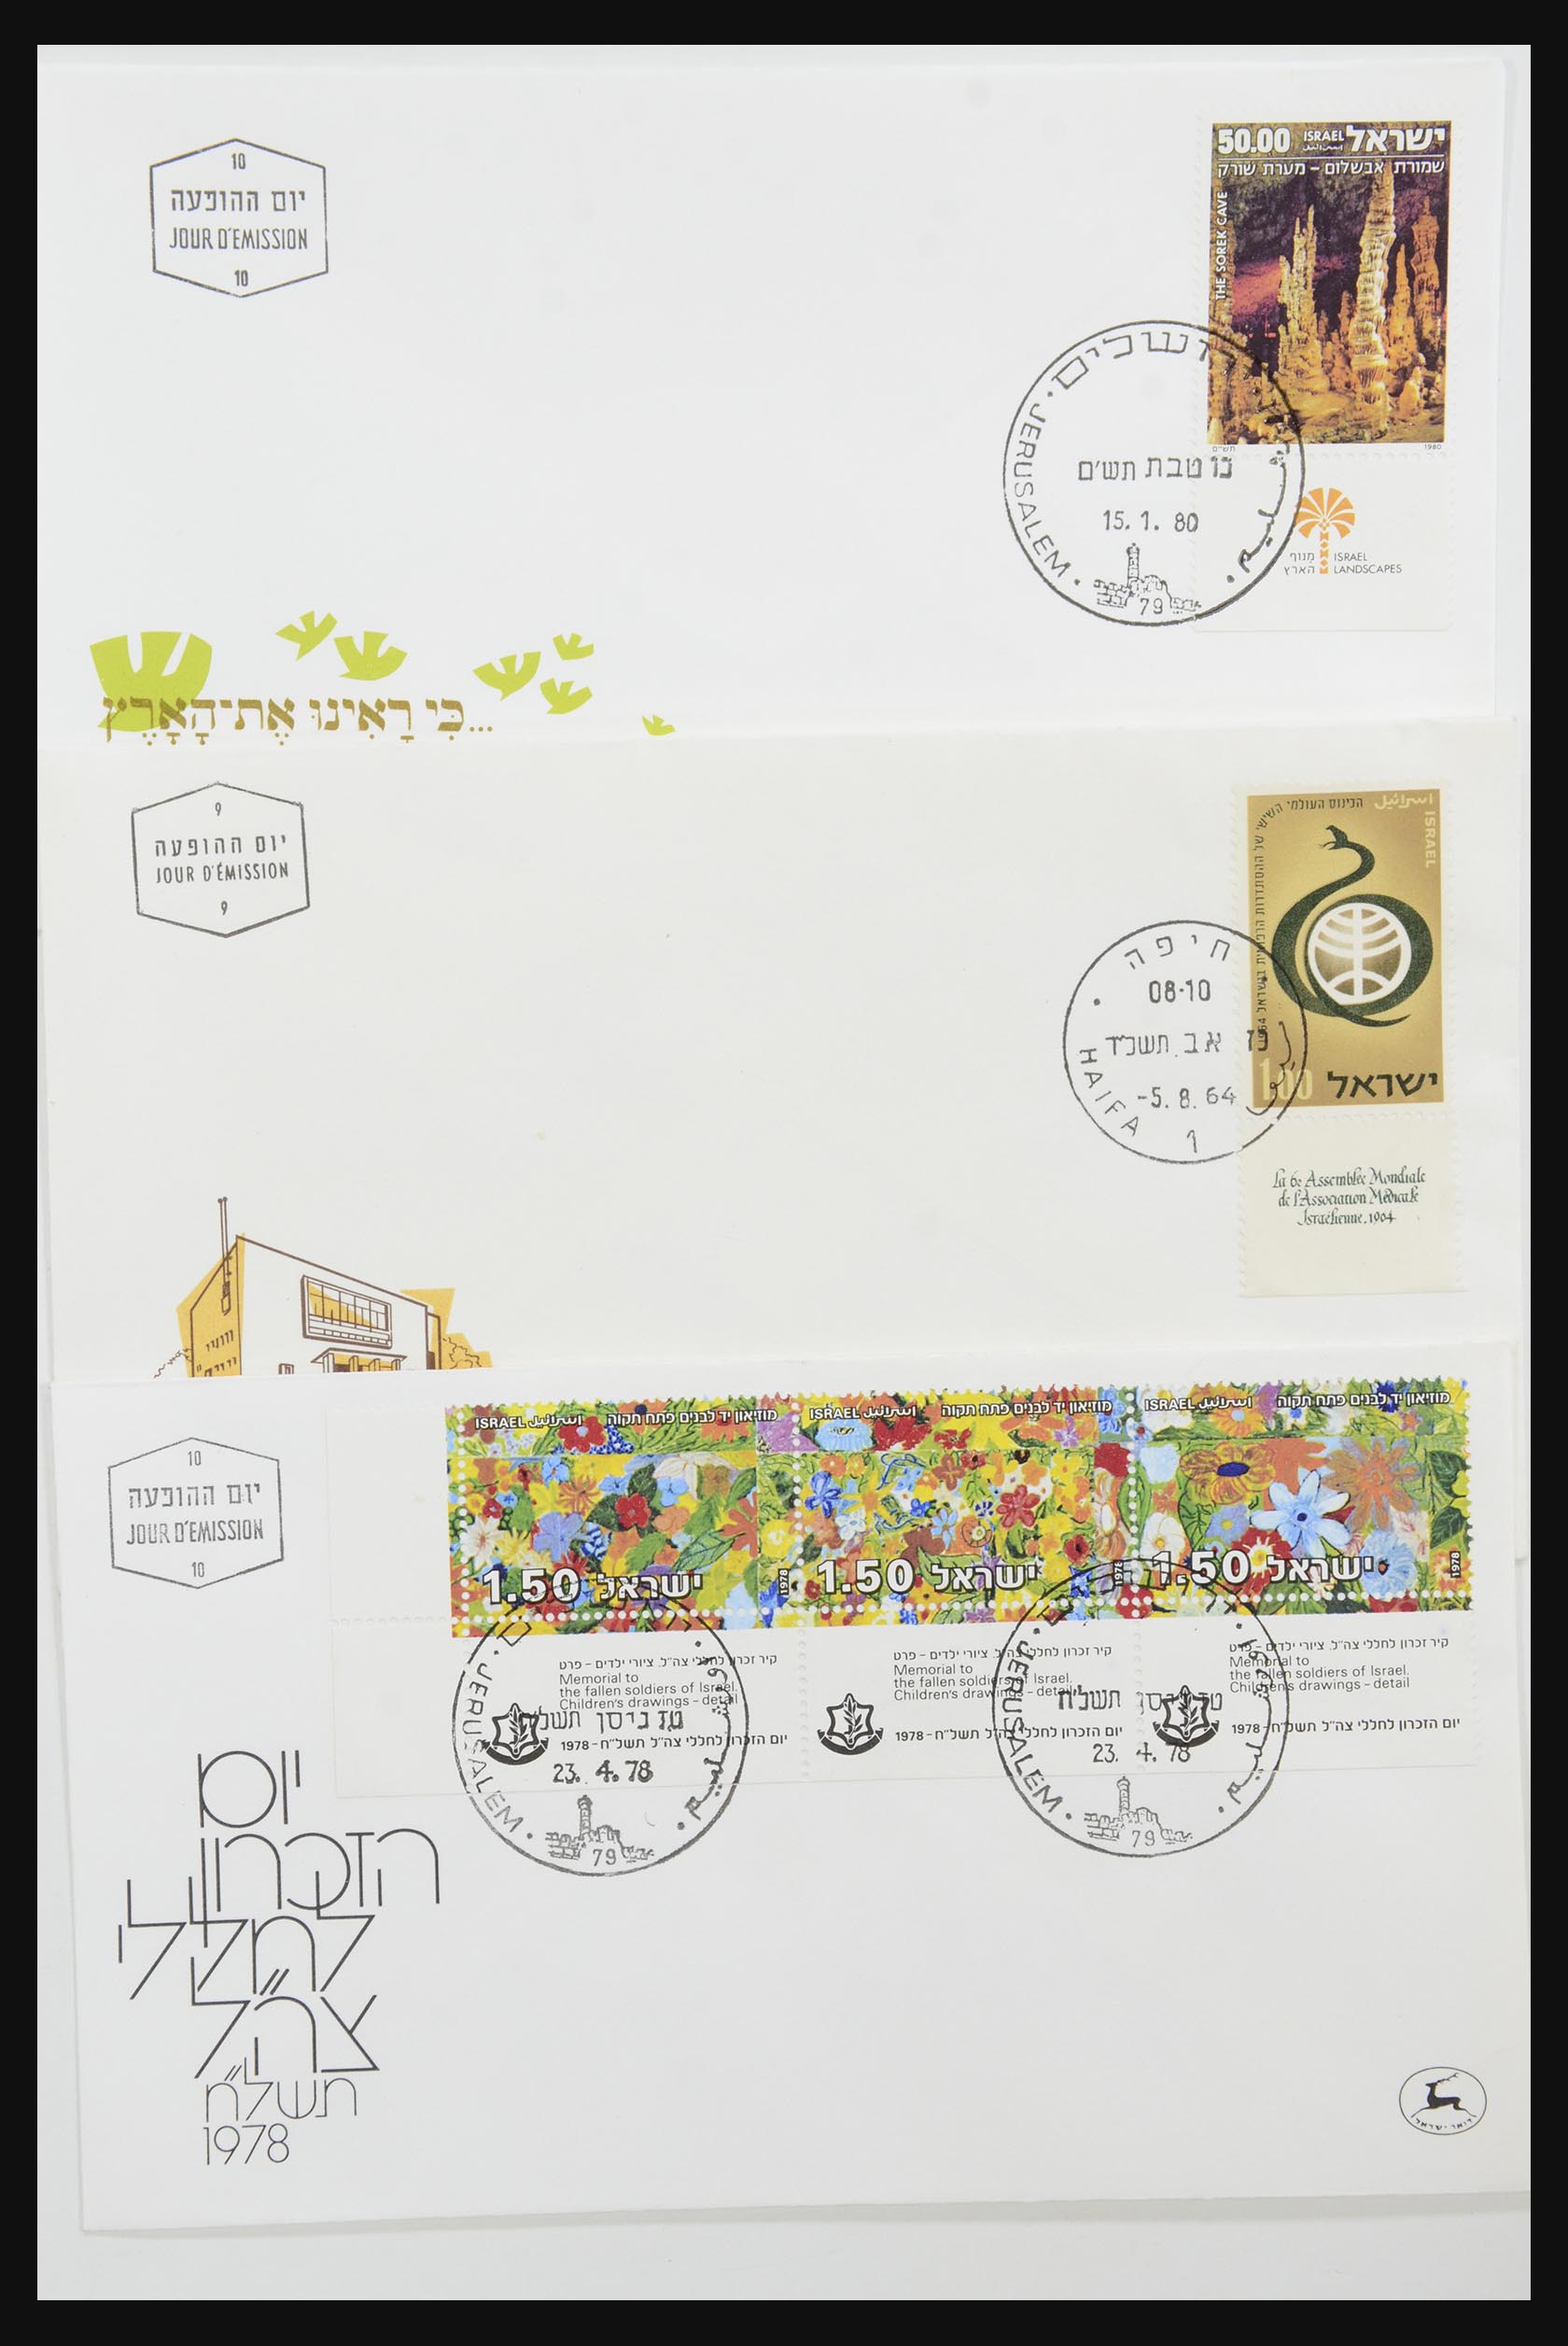 31924 005 - 31924 Israel first day cover collection 1957-2003.